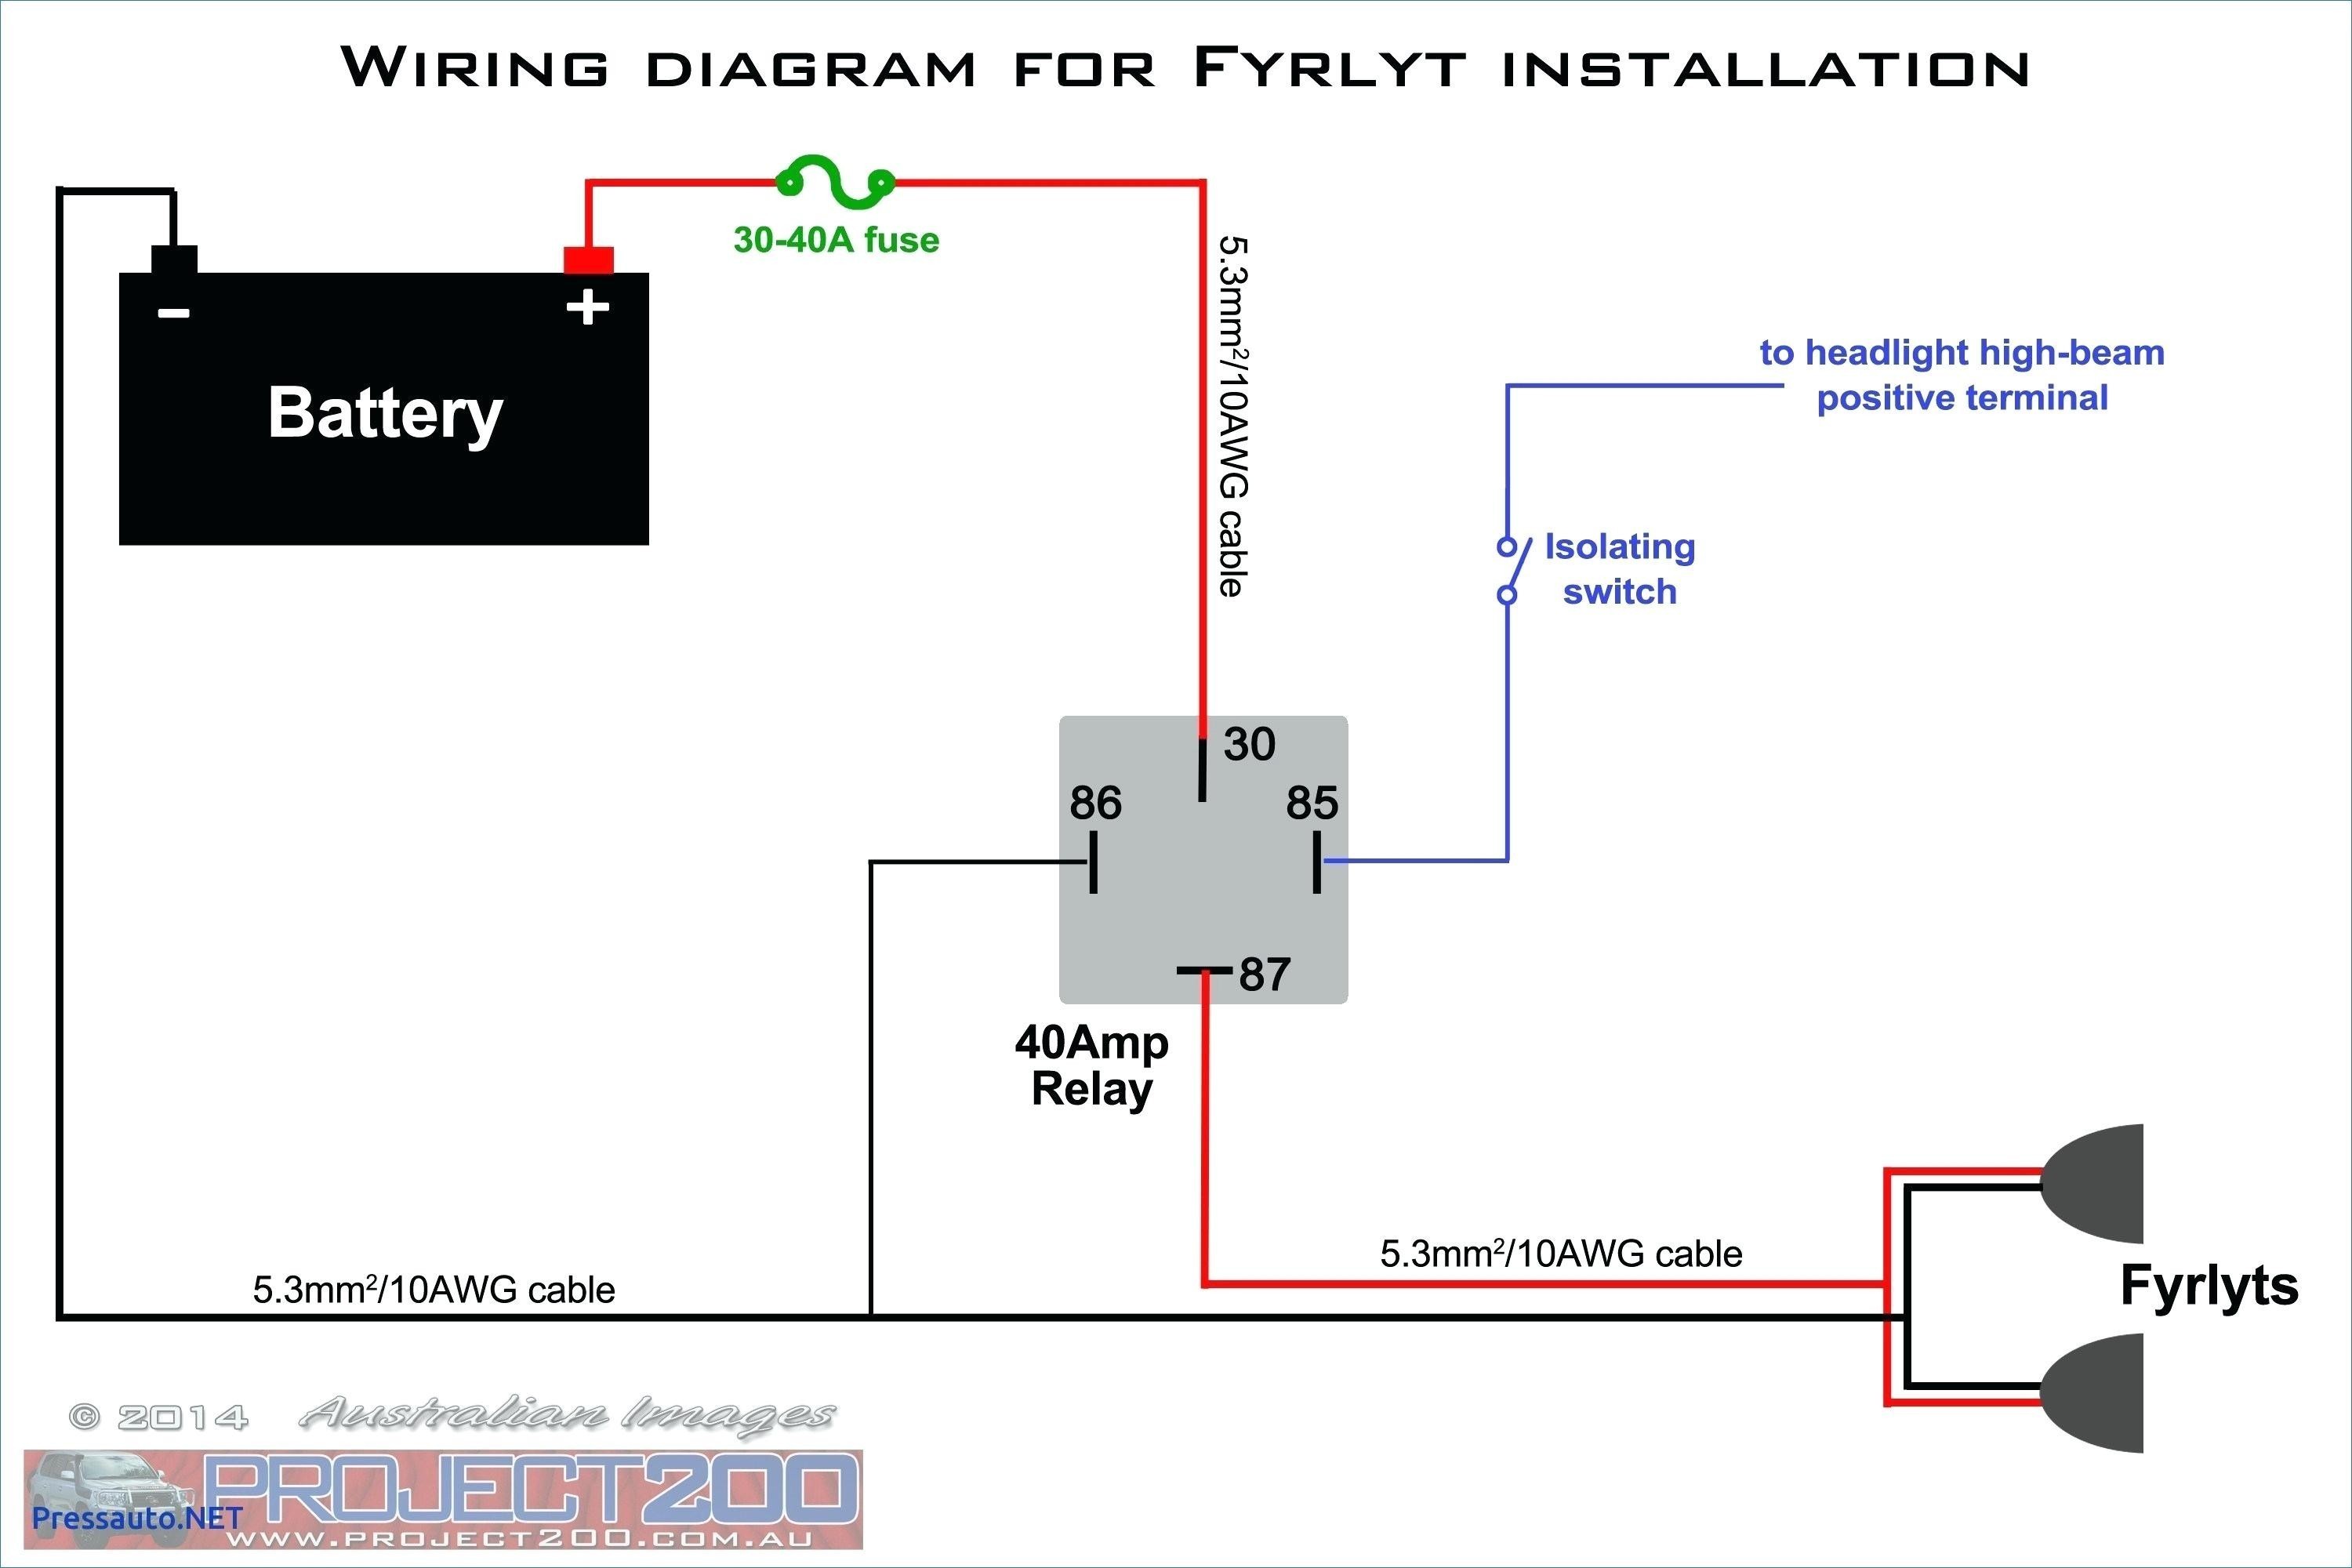 Wiring Diagram for Hella Lights Refrence Driving Light Relay Wiring Diagram